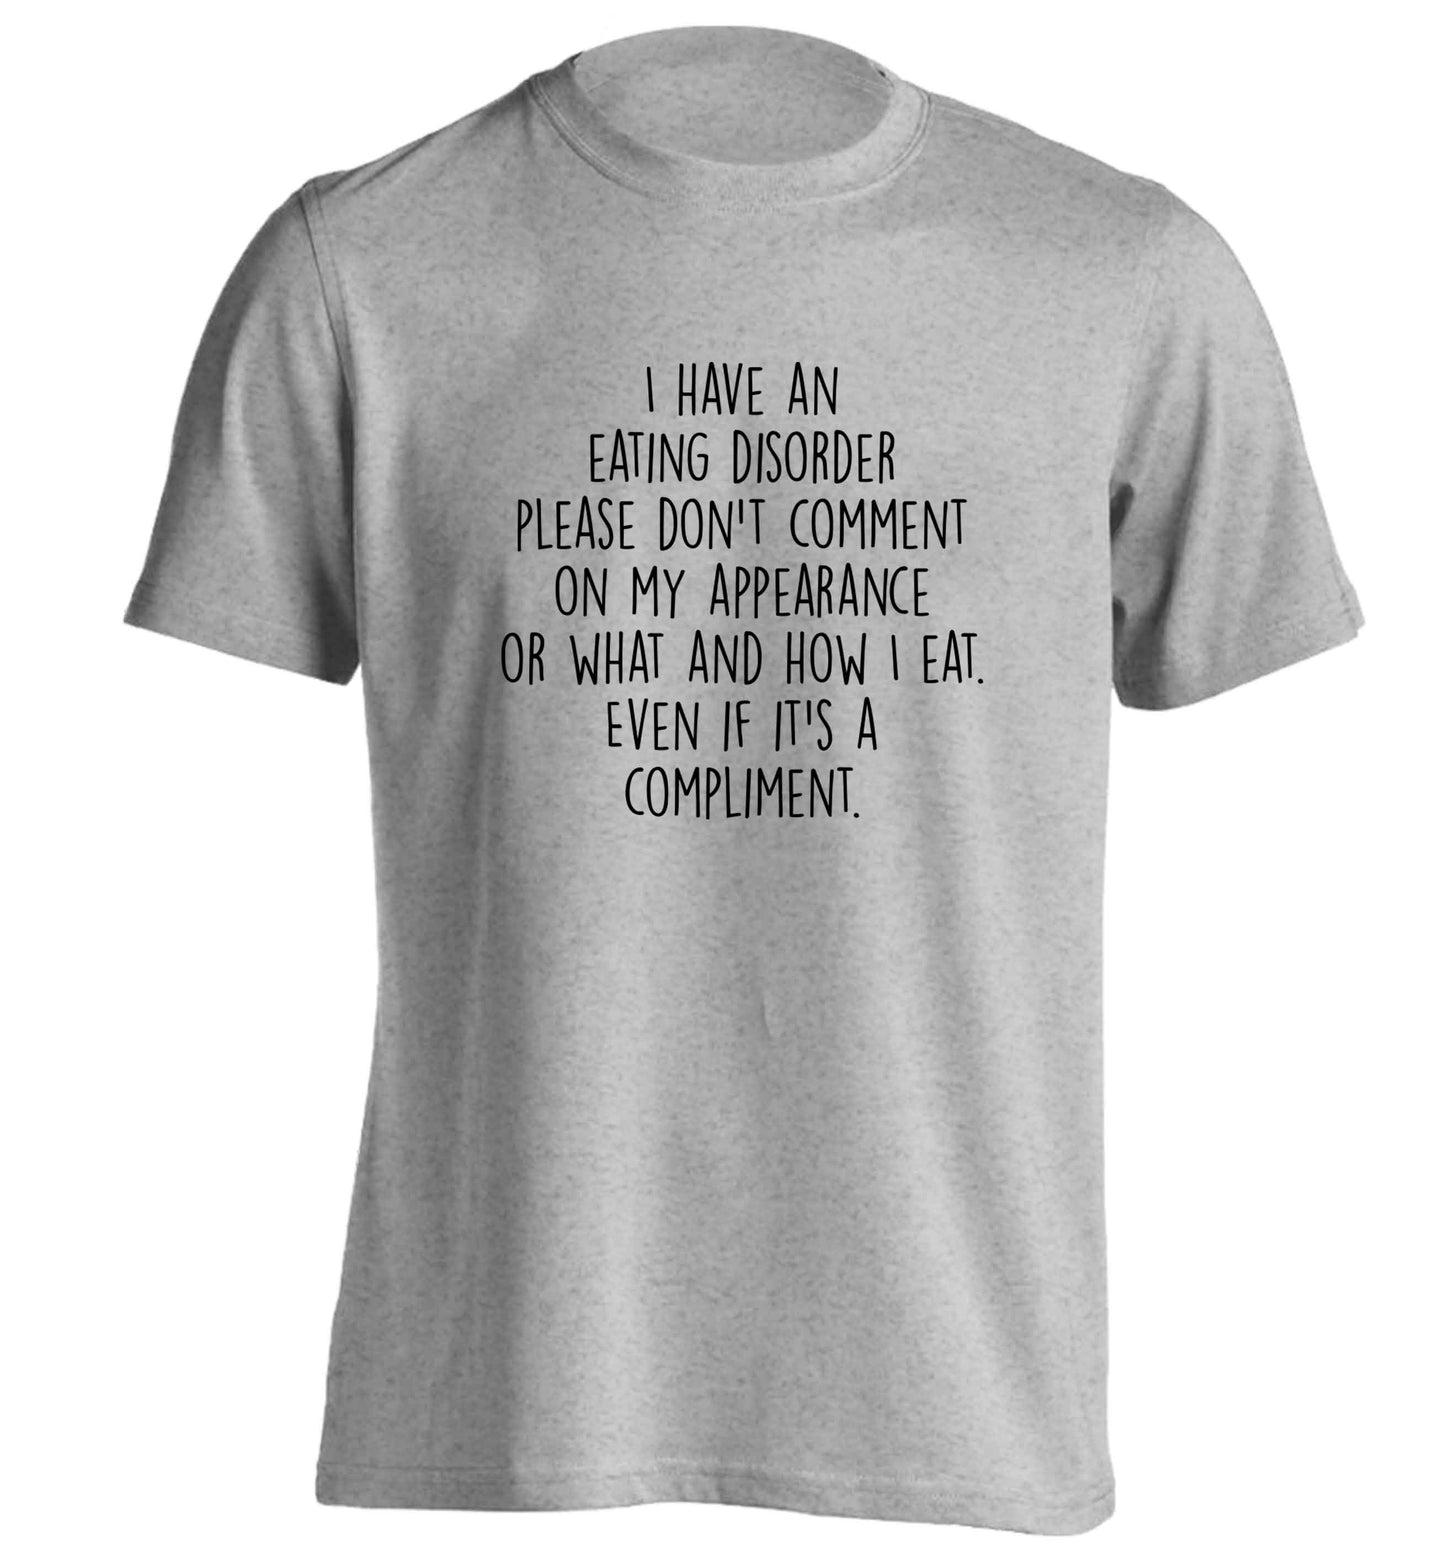 I have an eating disorder please don't comment on my appearance or what and how I eat. Even if it's a compliment adults unisex grey Tshirt 2XL